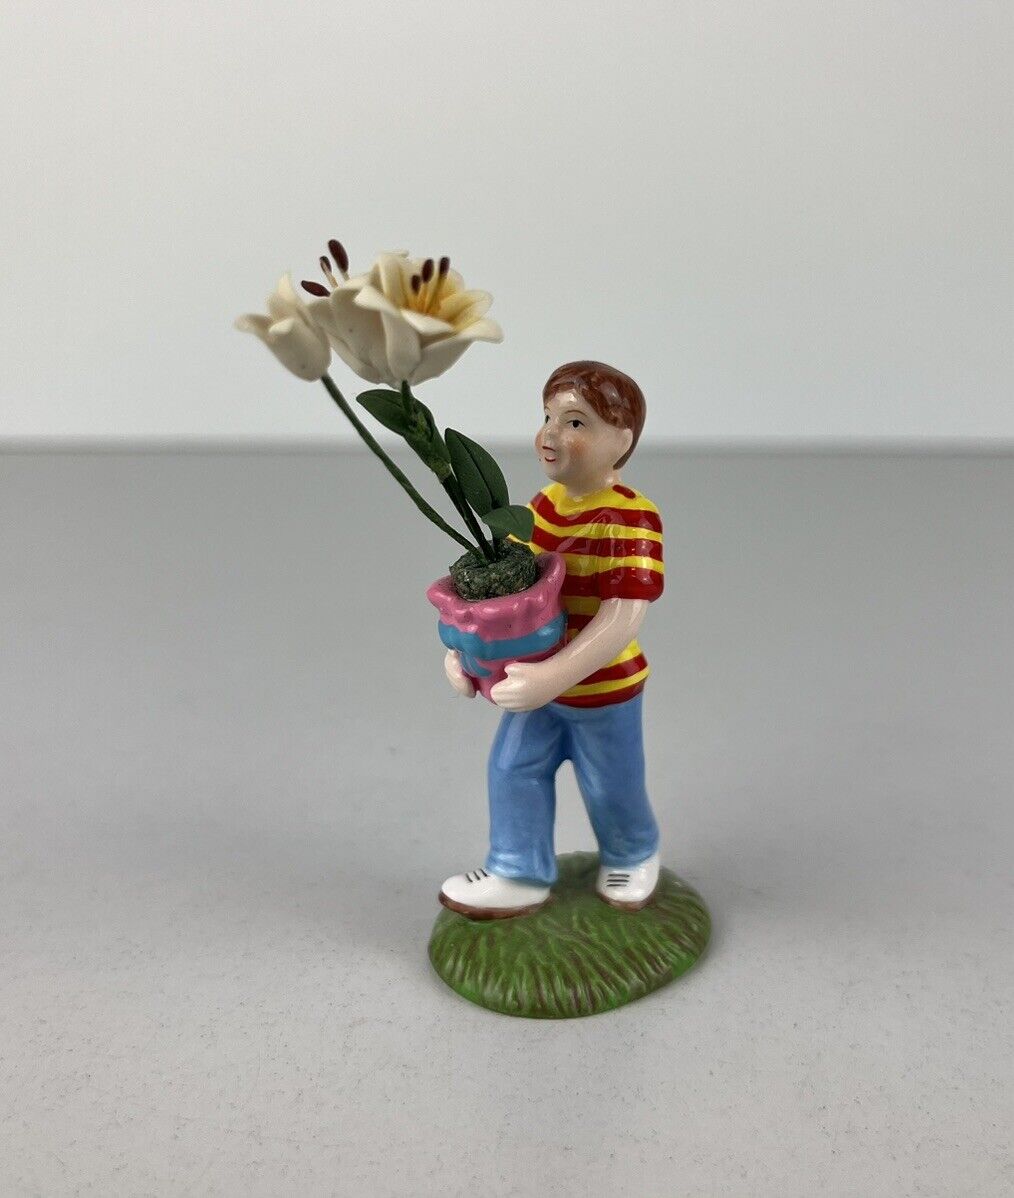 Department 56 Snow Village Easter Lily’s Nursery 2” Boy Figure w/ Lily Plant